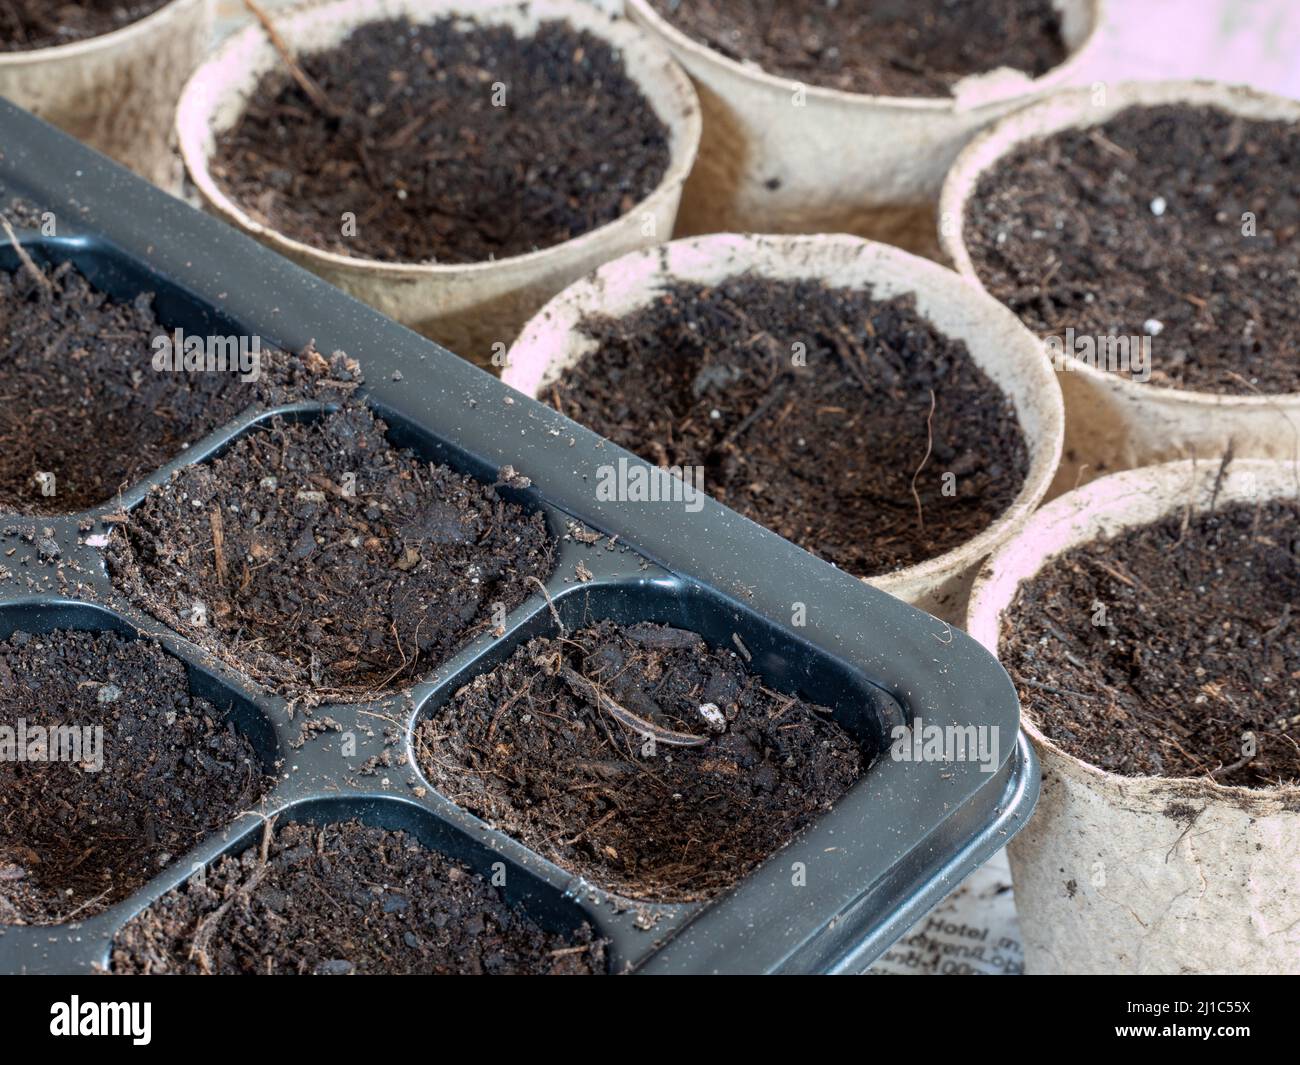 Sowing pots for plants in spring Stock Photo